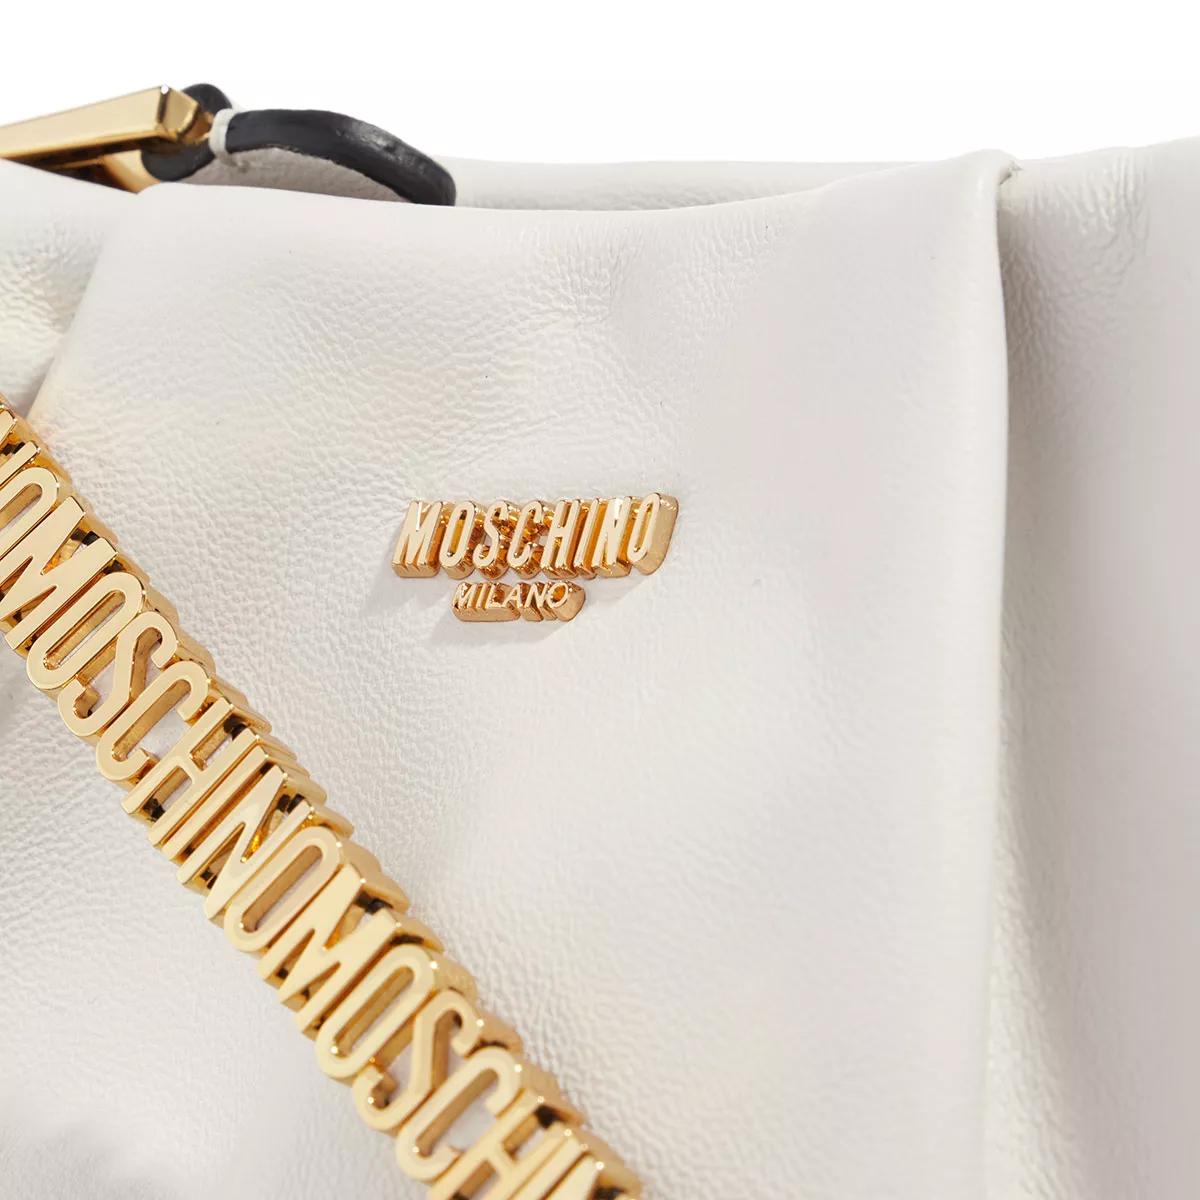 Moschino Pochettes Mini Lettering Shoulder Bag in wit